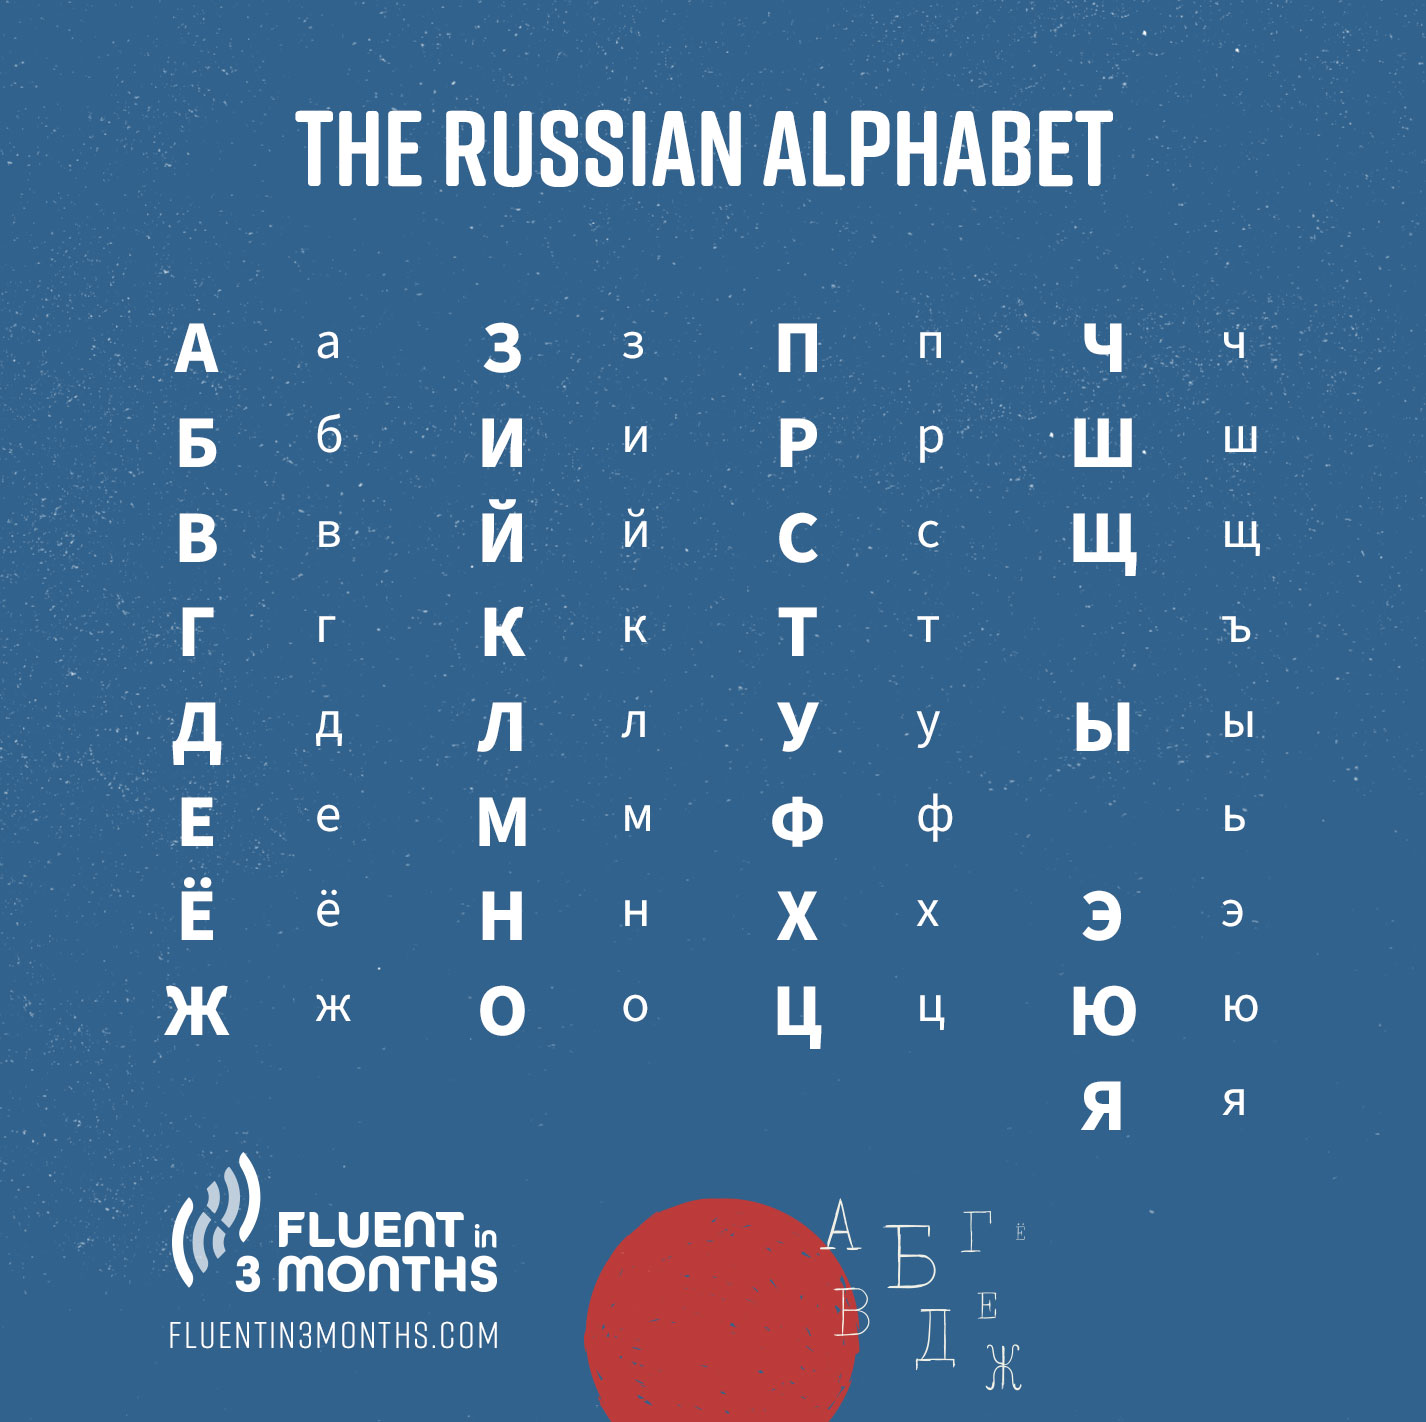 Learn The Russian Alphabet How To Quickly Master The Cyrillic Alphabet